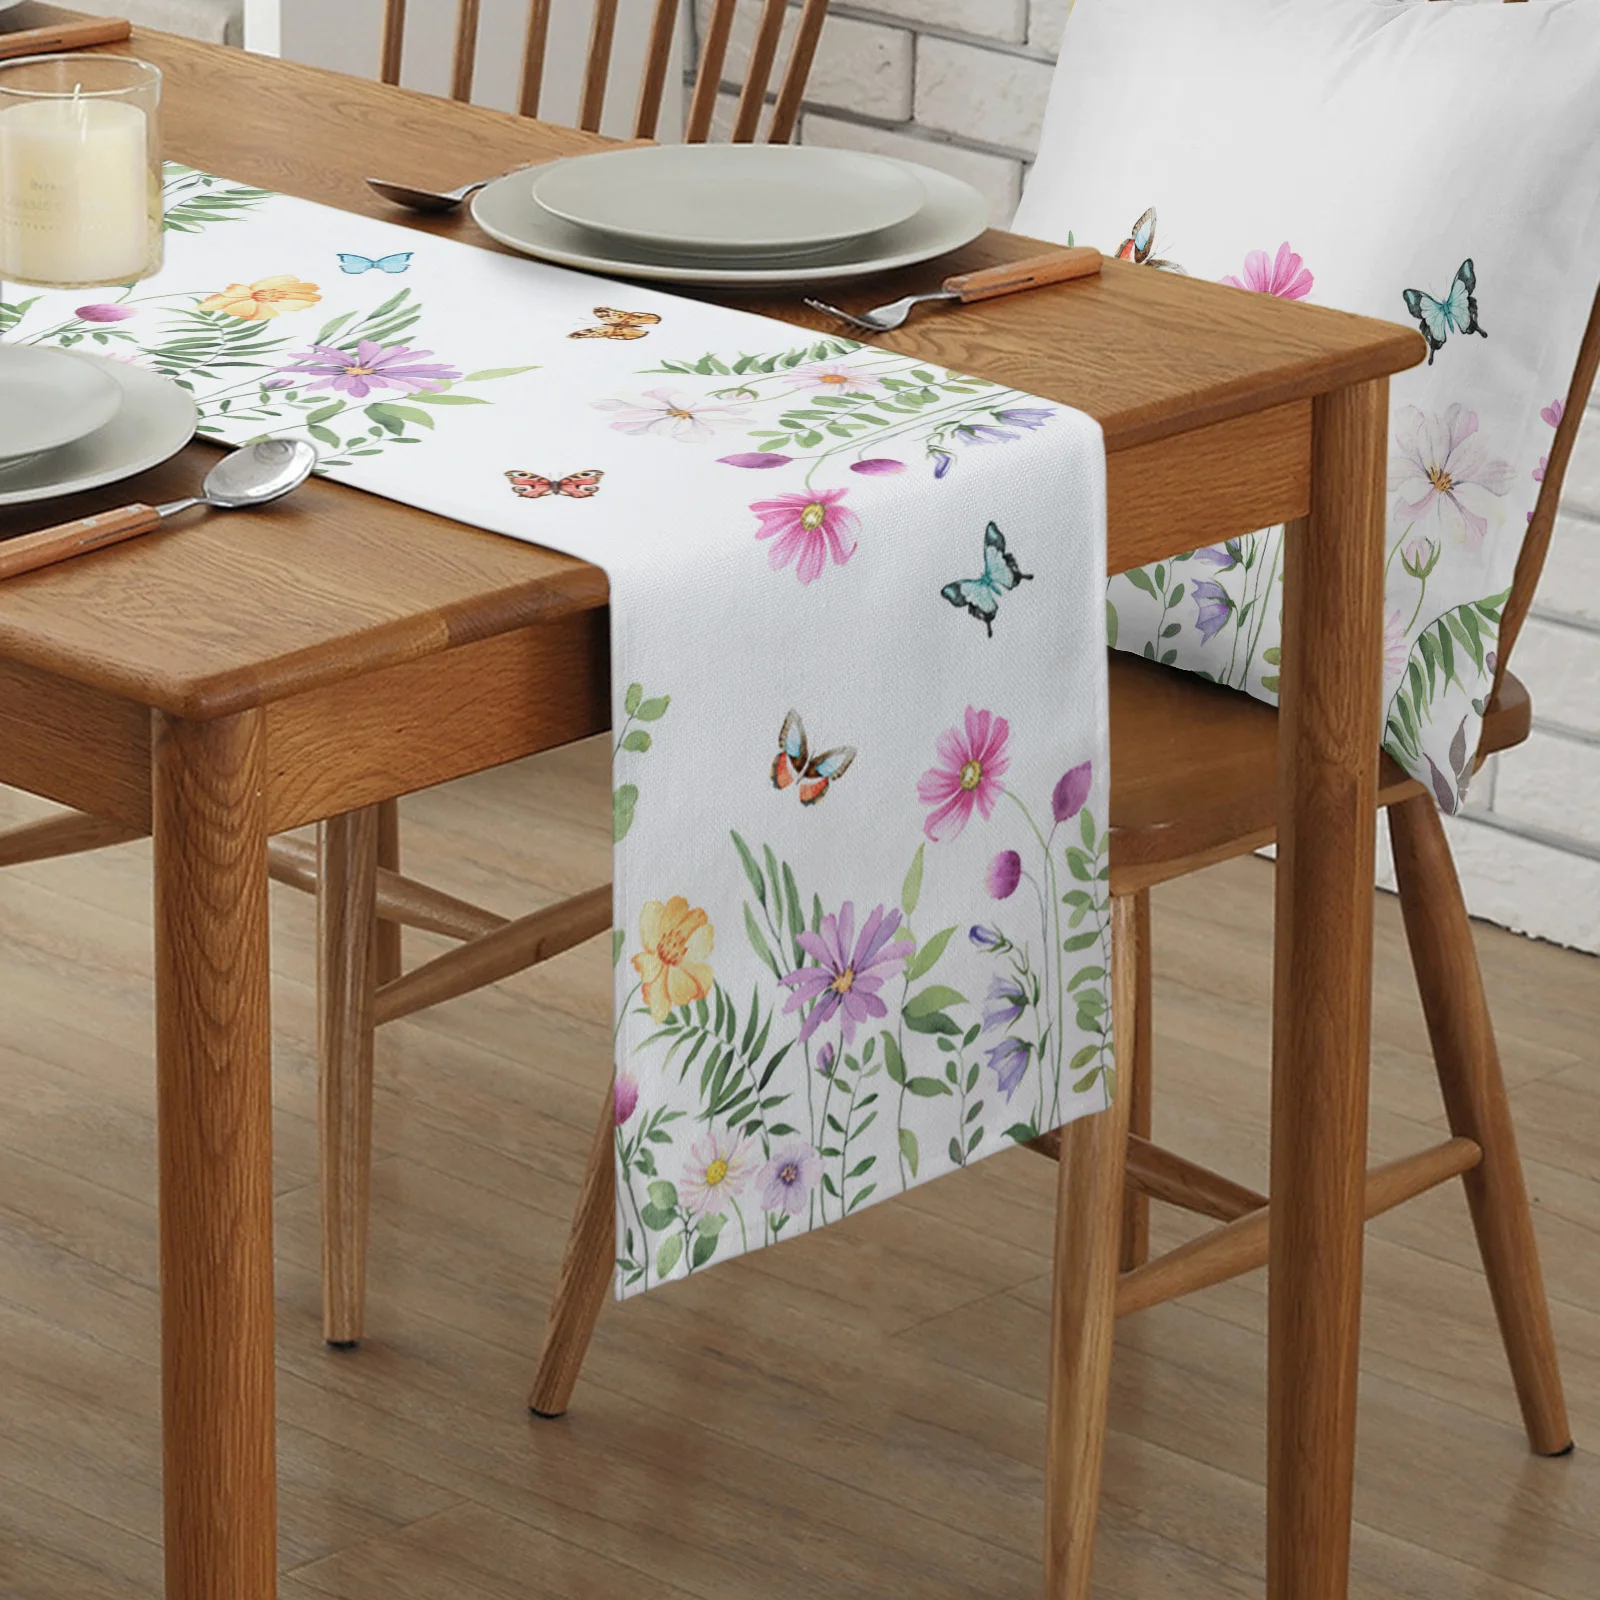 

Spring Flower and Butterfly Table Runner, Luxury Kitchen Dinner Table Cover, Wedding Party Decor, Cotton Linen Tablecloth